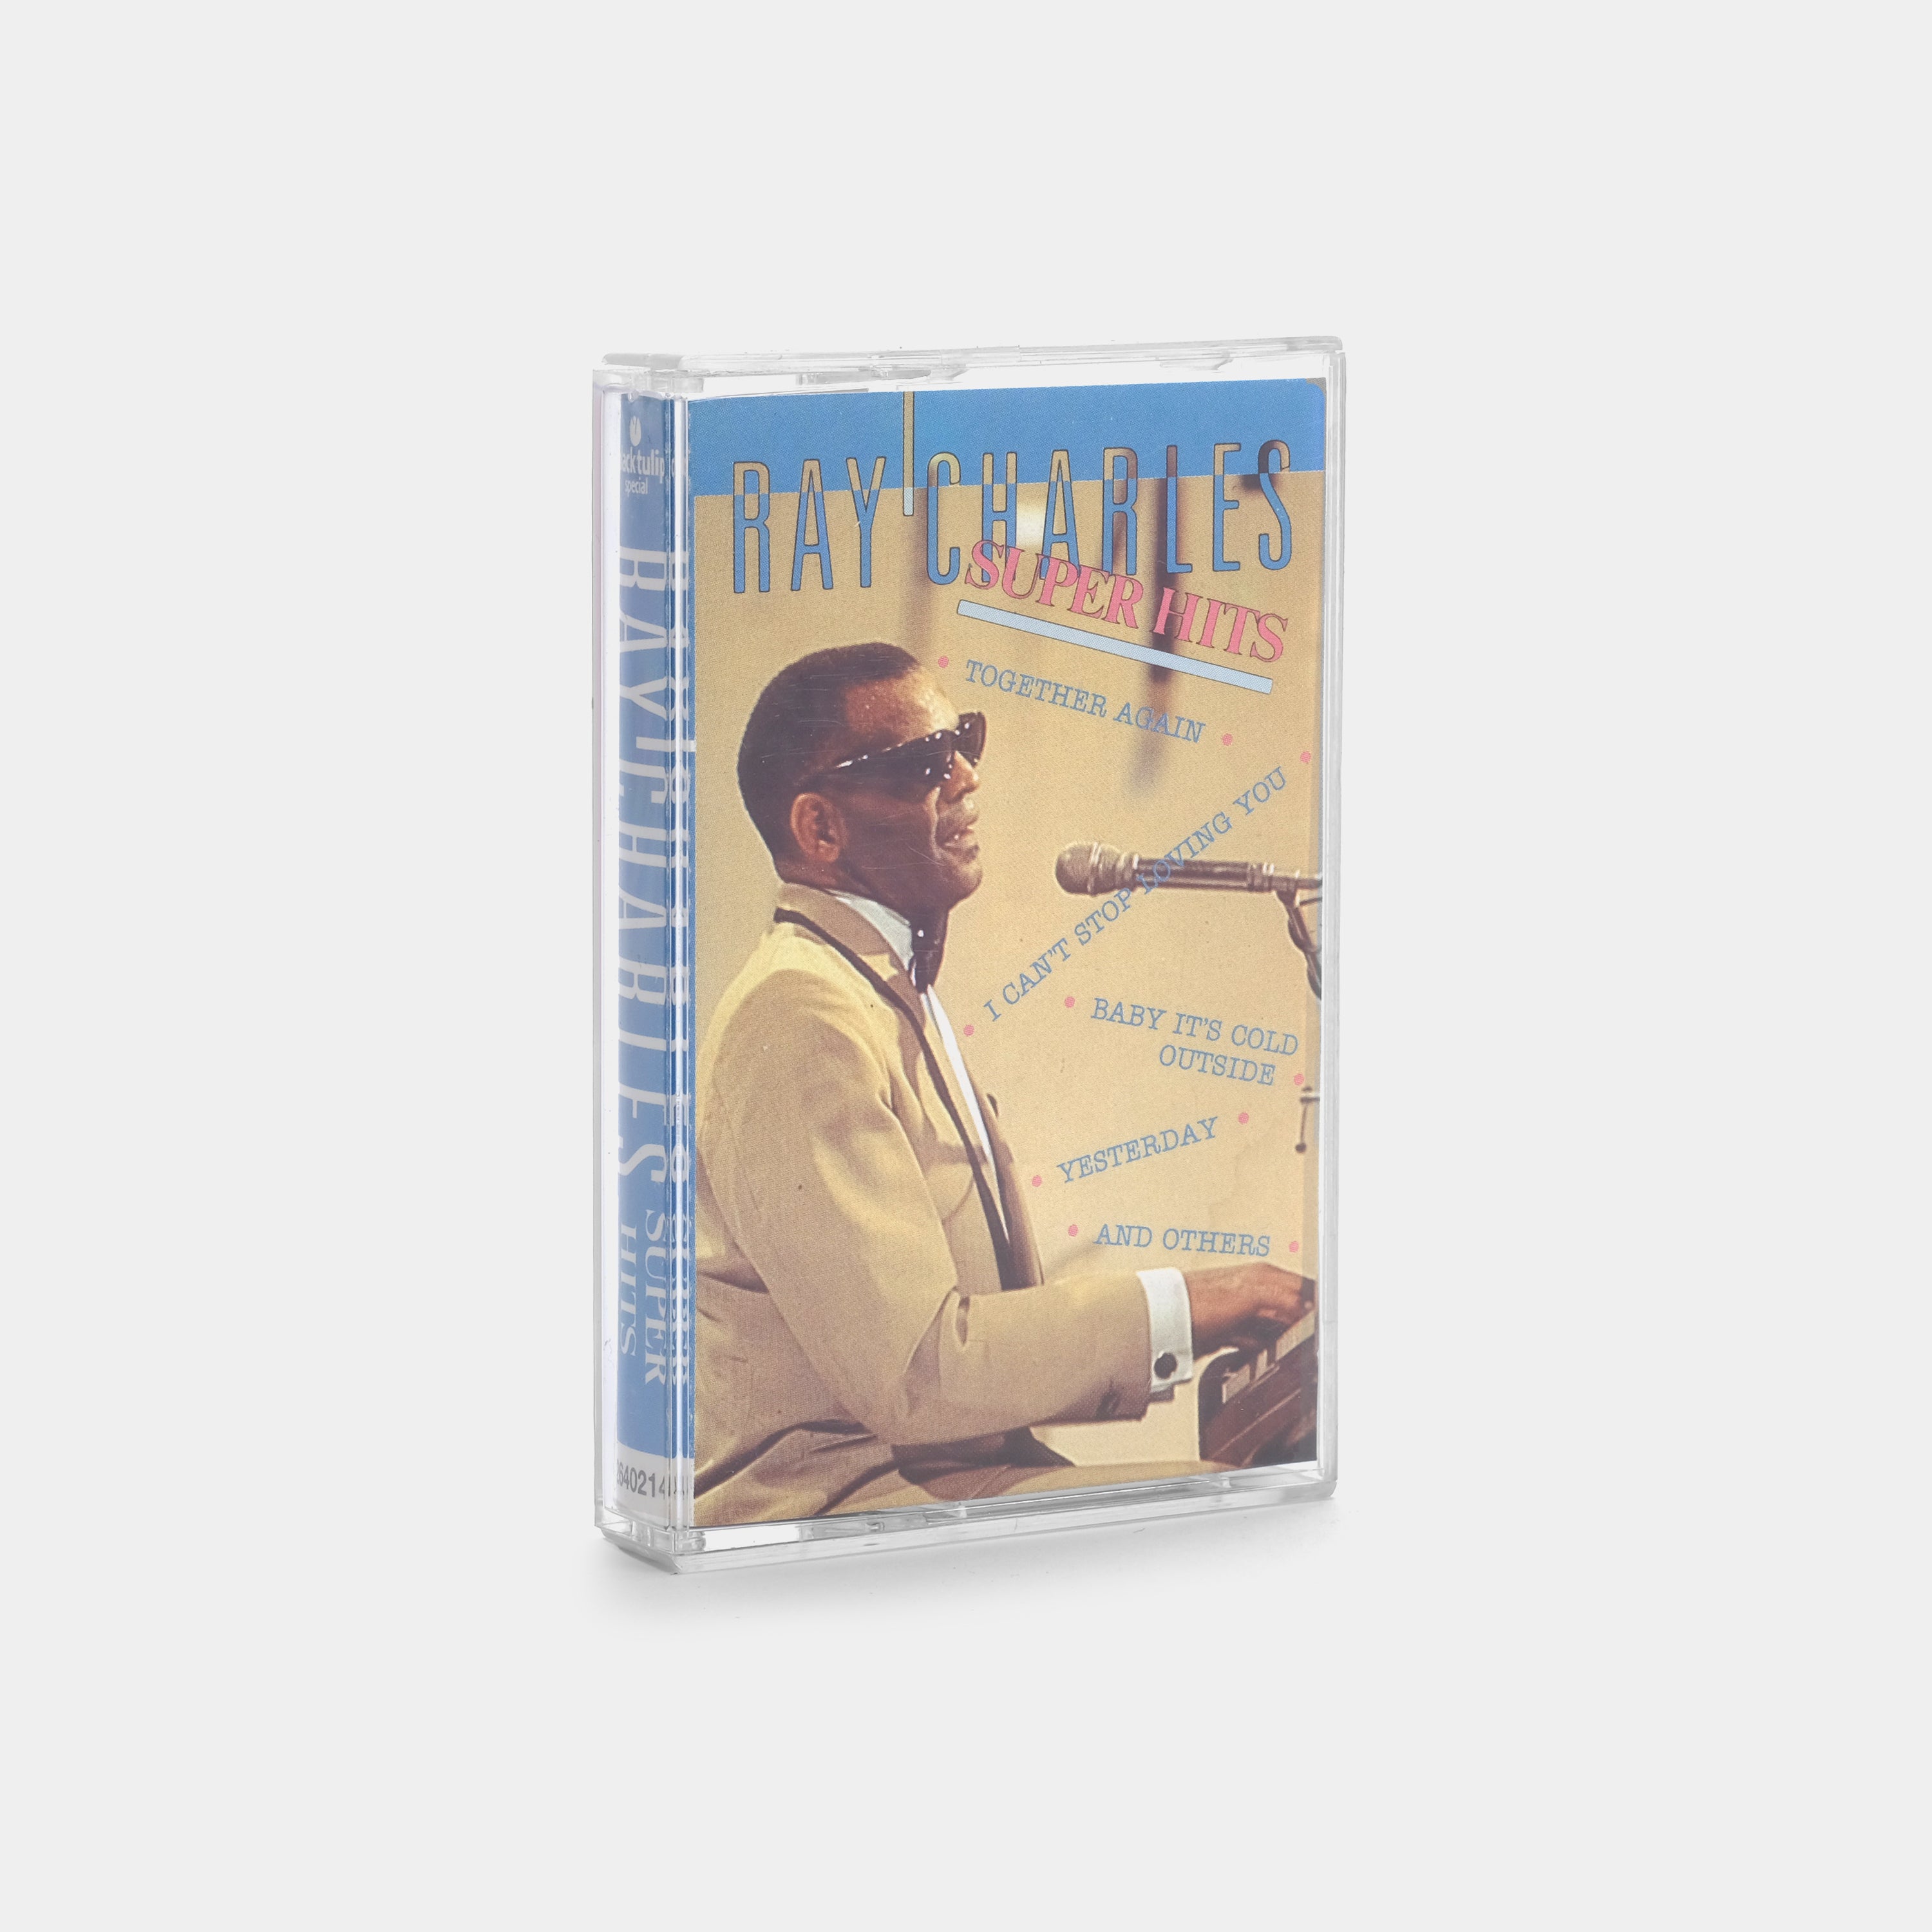 Ray Charles - Super Hits Cassette Tape